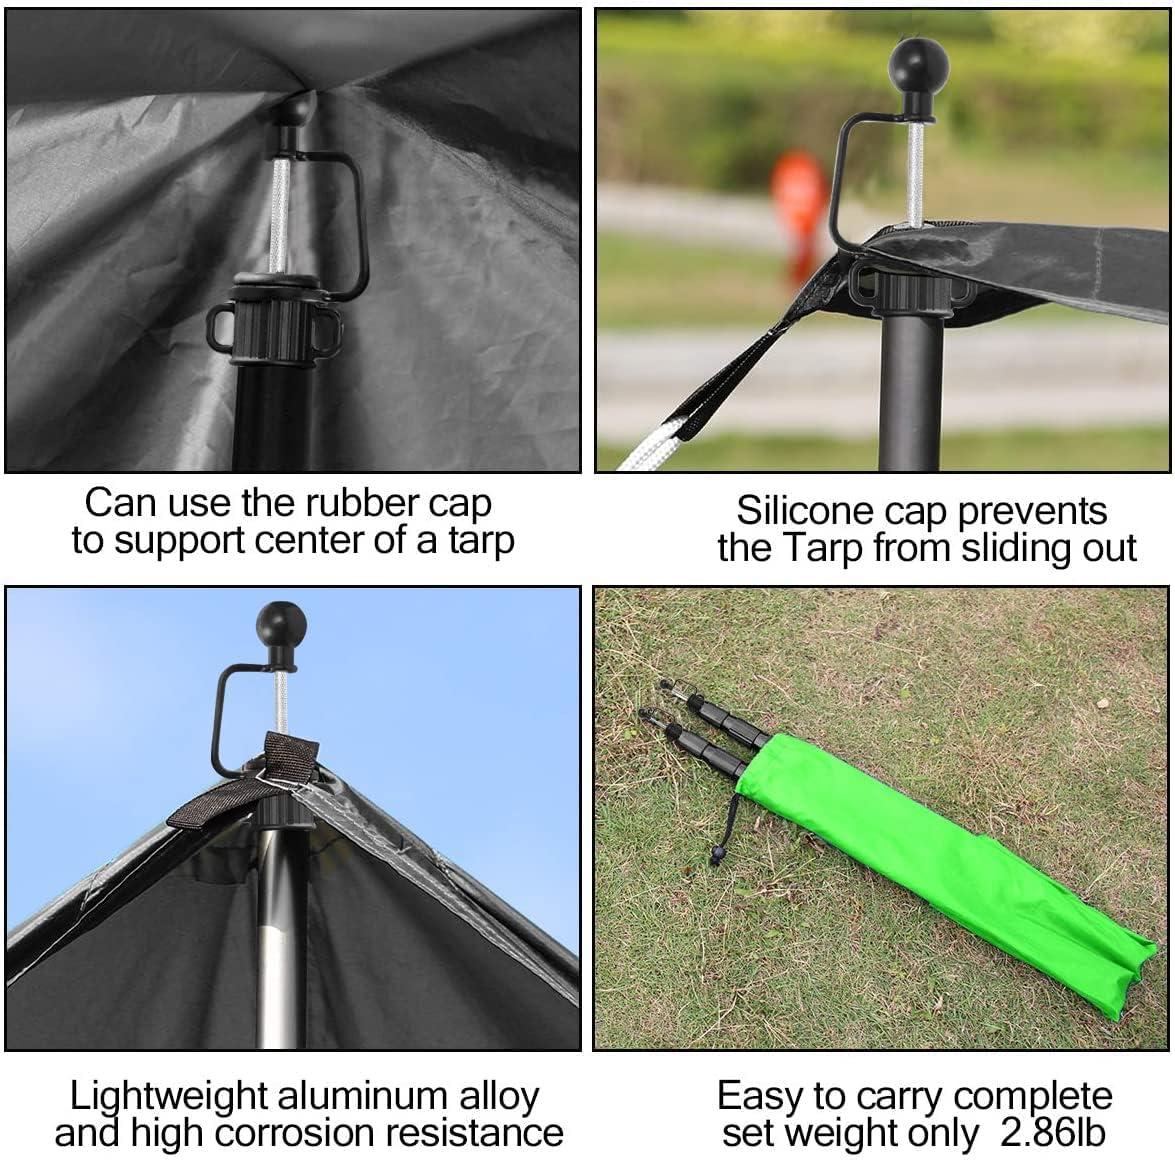 Telescoping Tarp Poles 98.5in Aluminum Camping Tent Poles,Tent Stakes for  Hiking,Lightweight Tent Poles for Tarp, 4 Section Adjustable Tent  Accessories Set of 2 &1 Bag Silver 33.5-98.5in Telescoping Aviation  Aluminum Pole